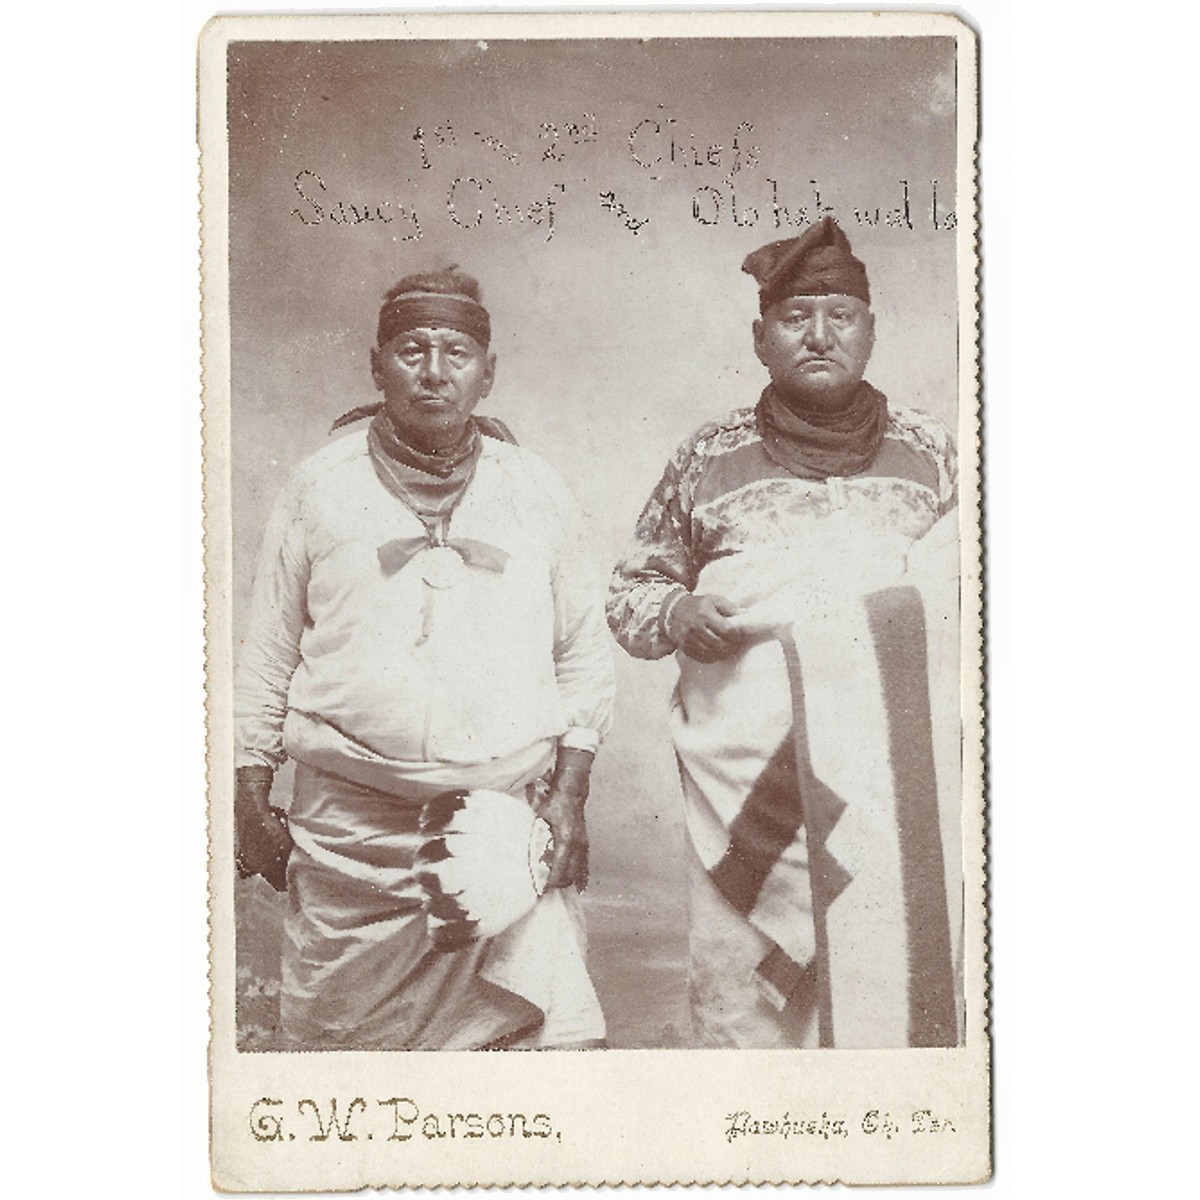 Rare photograph of Oklahoma Territory Indian chiefs Saucy & Olohahwalla - G.W. Parsons